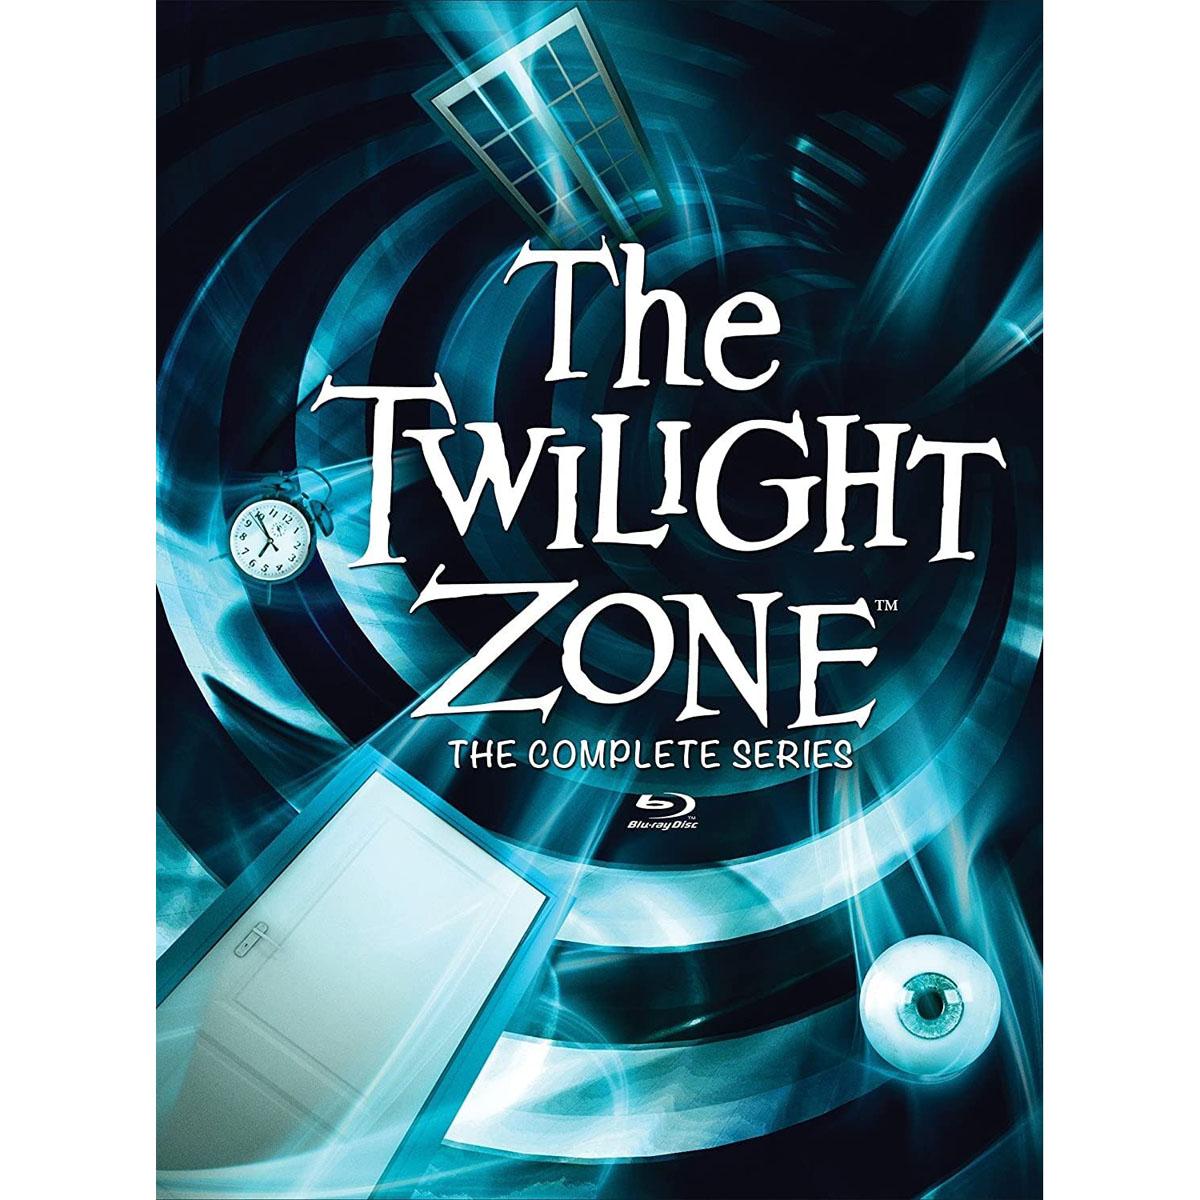 The Twilight Zone The Complete Series Blu-ray for $43.19 Shipped